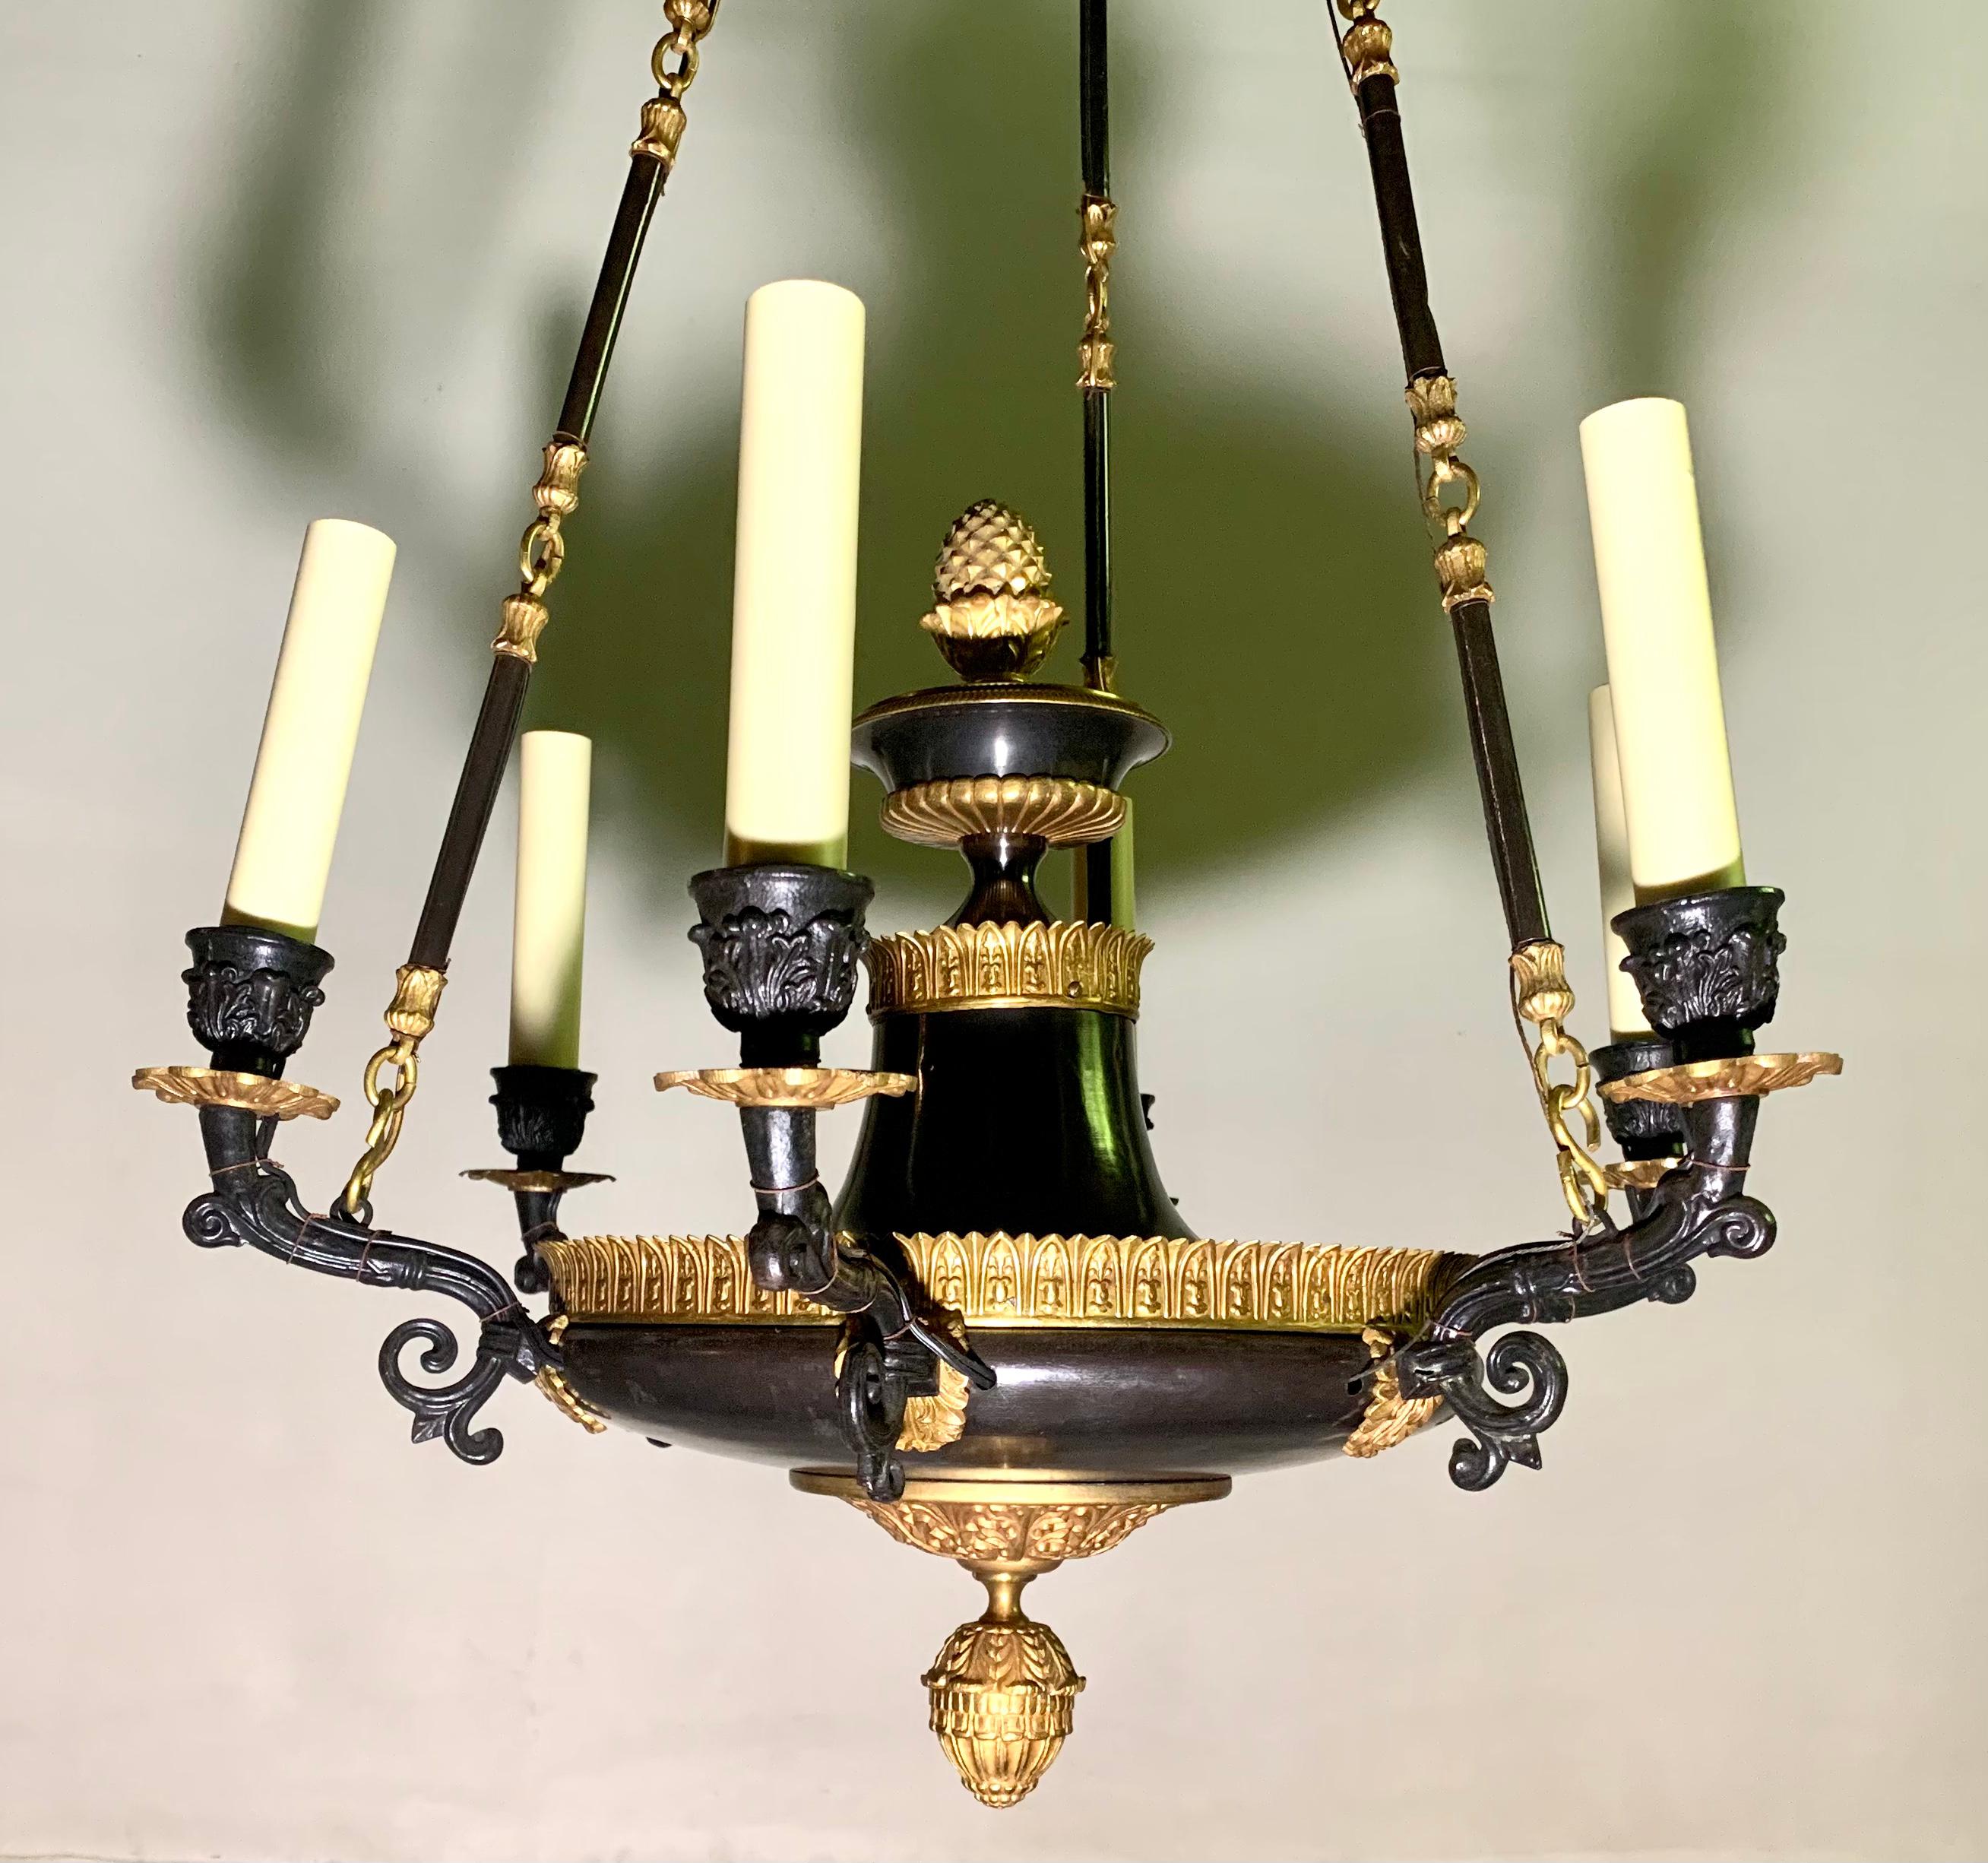 Fine French Empire Gilt Bronze and Patinated Metal Six Light Chandelier For Sale 2